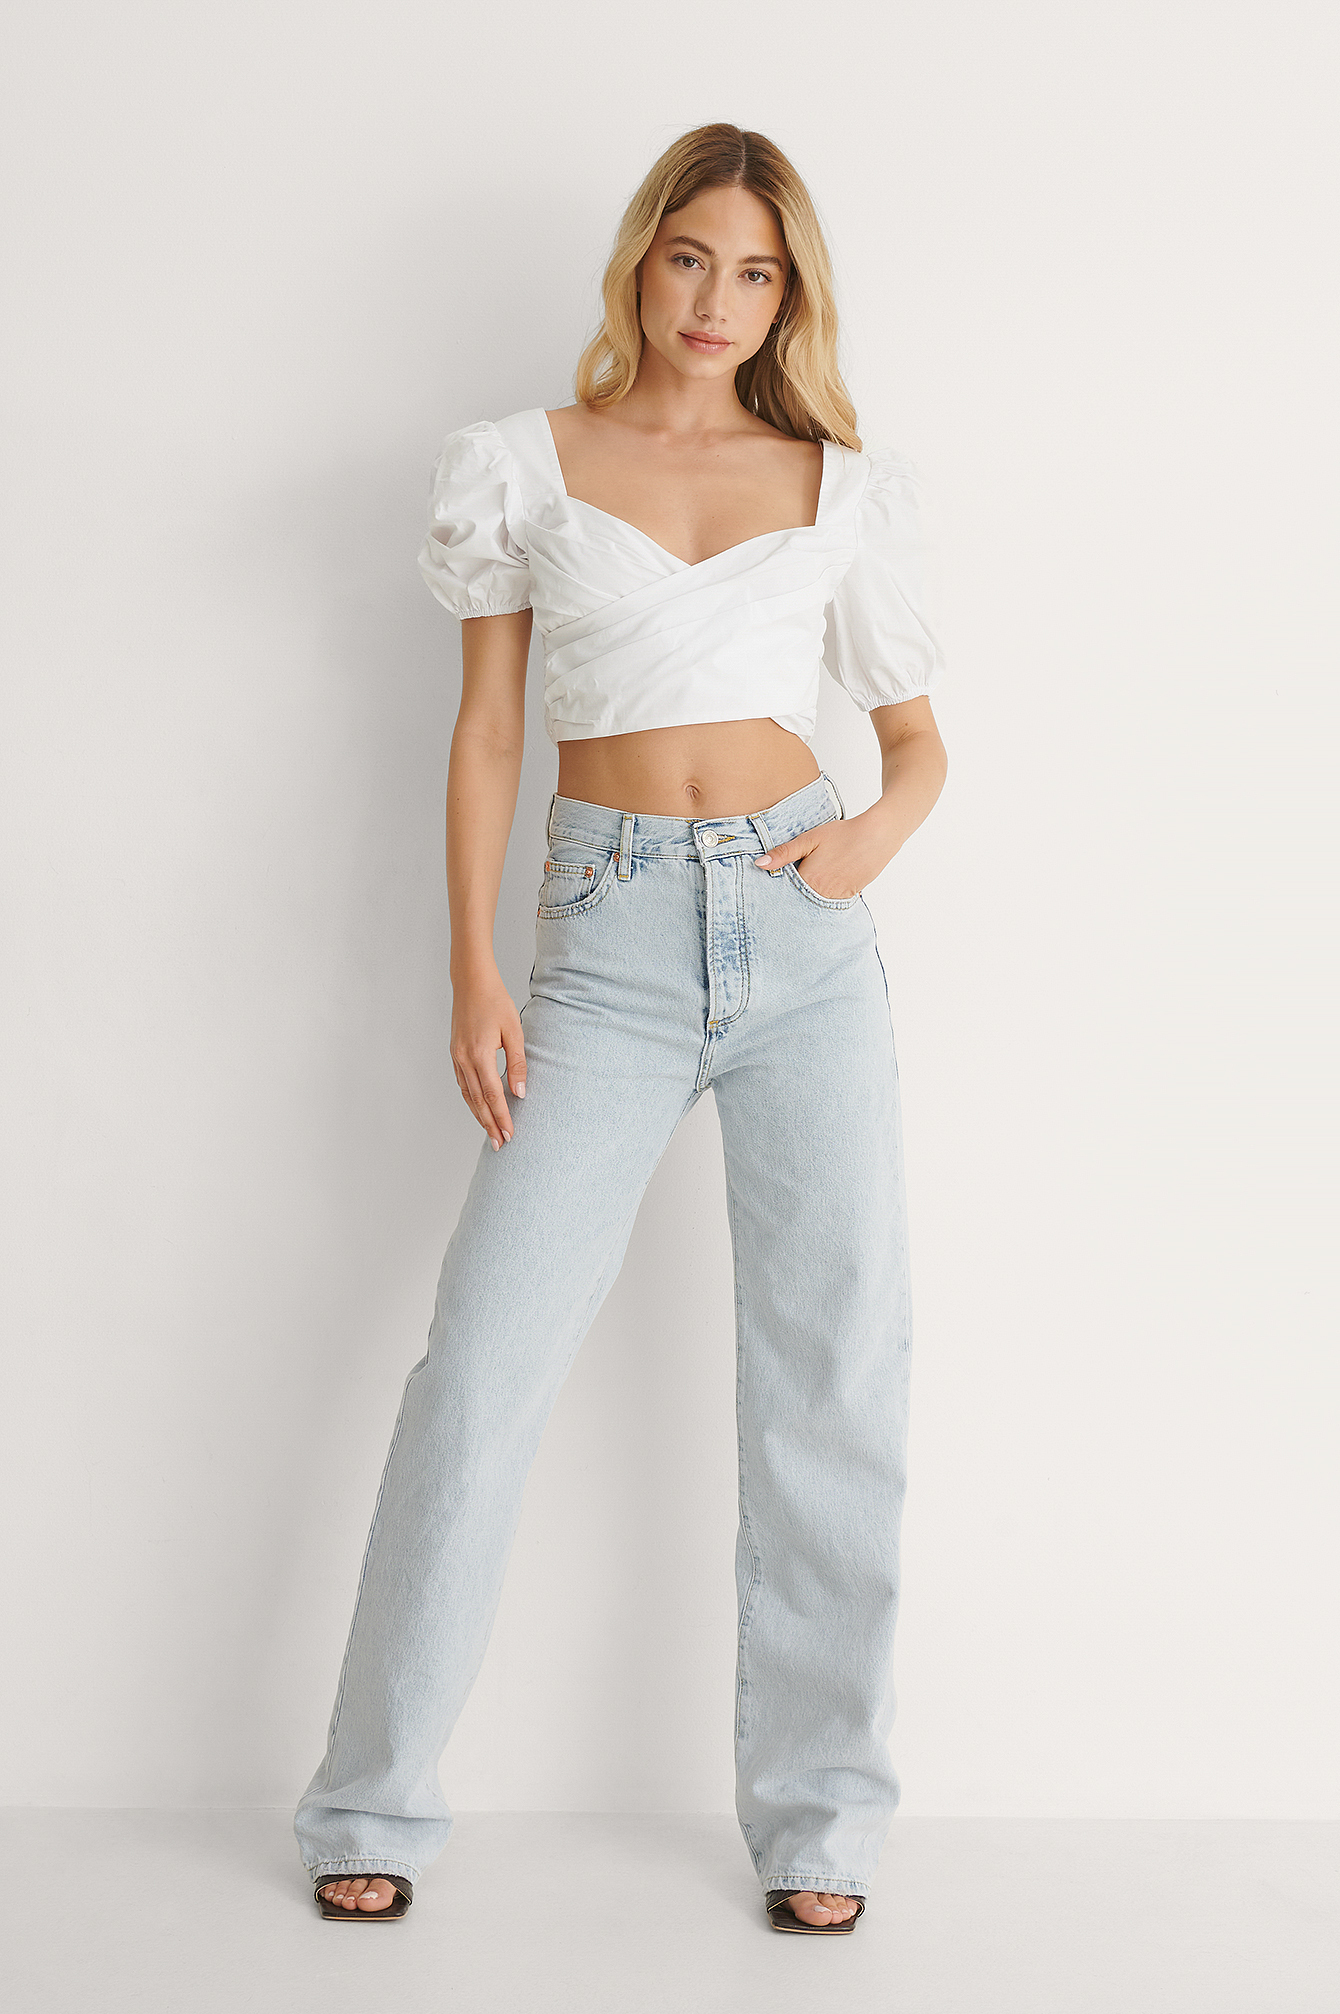 Cotton Cropped Top Outfit.